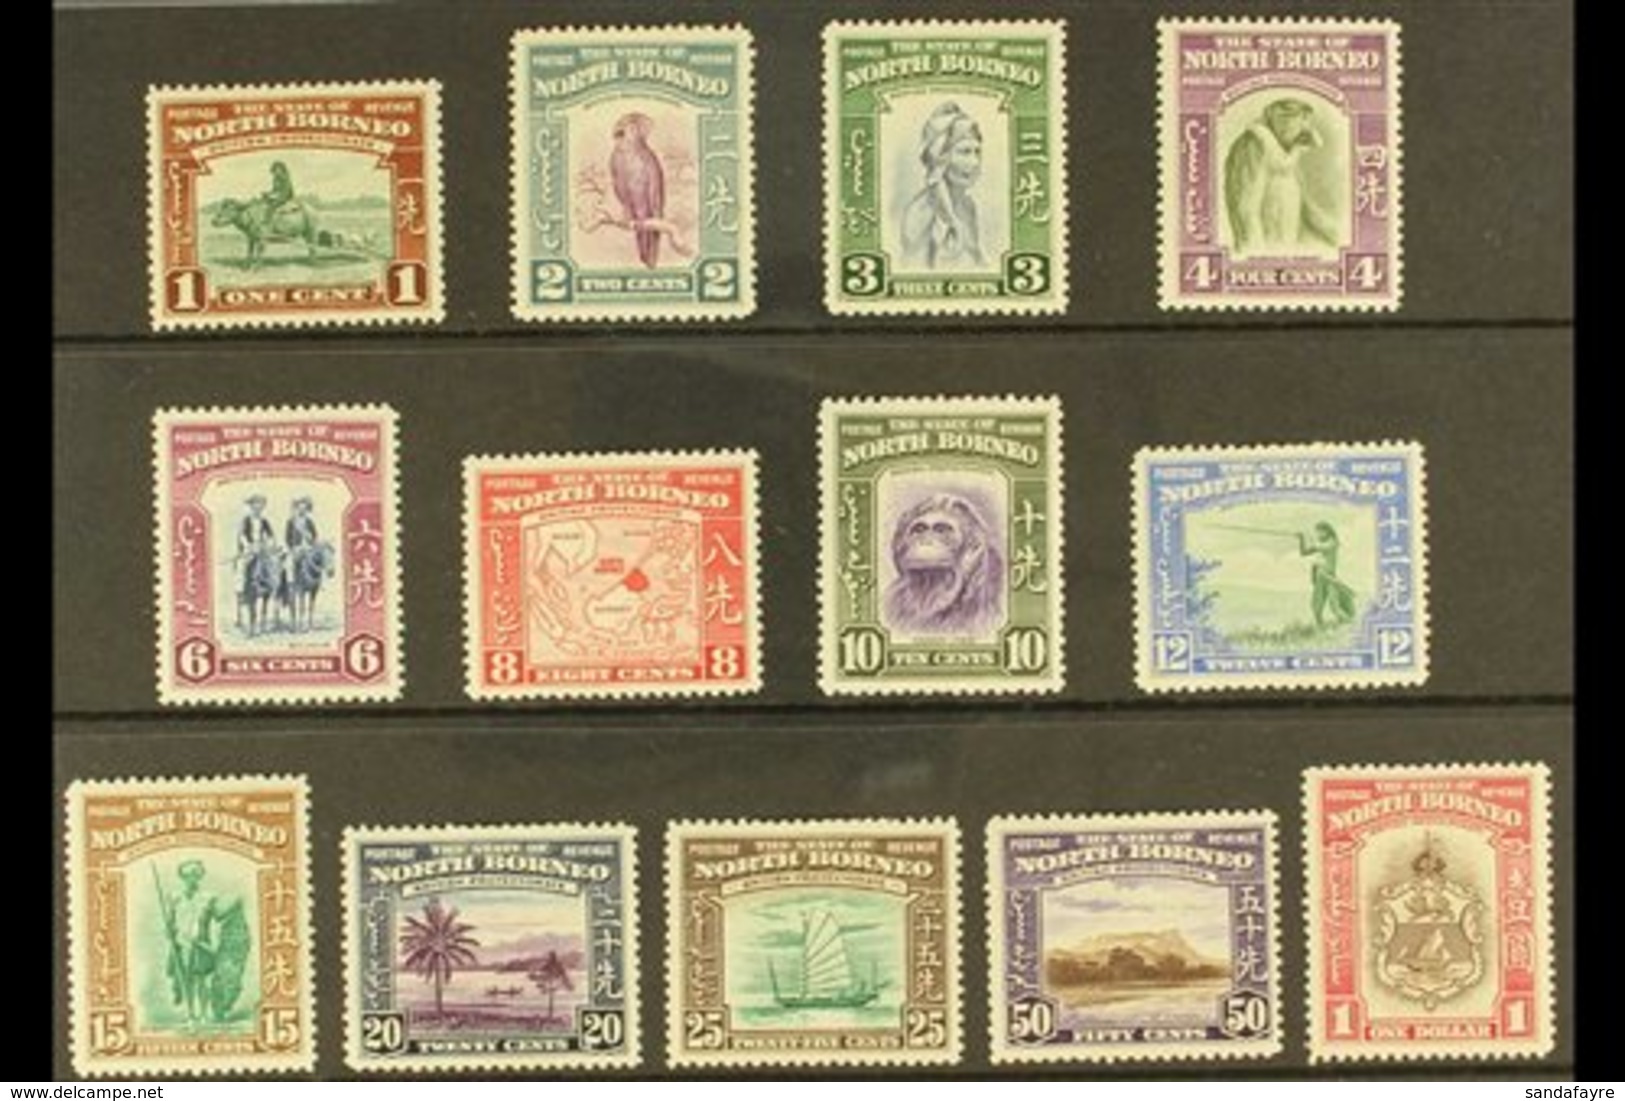 1939 Pictorial Definitive Set Complete To $1, SG 303/315, Mint, Mostly Fine Including The Good $1 Value. (13 Stamps) For - Borneo Septentrional (...-1963)